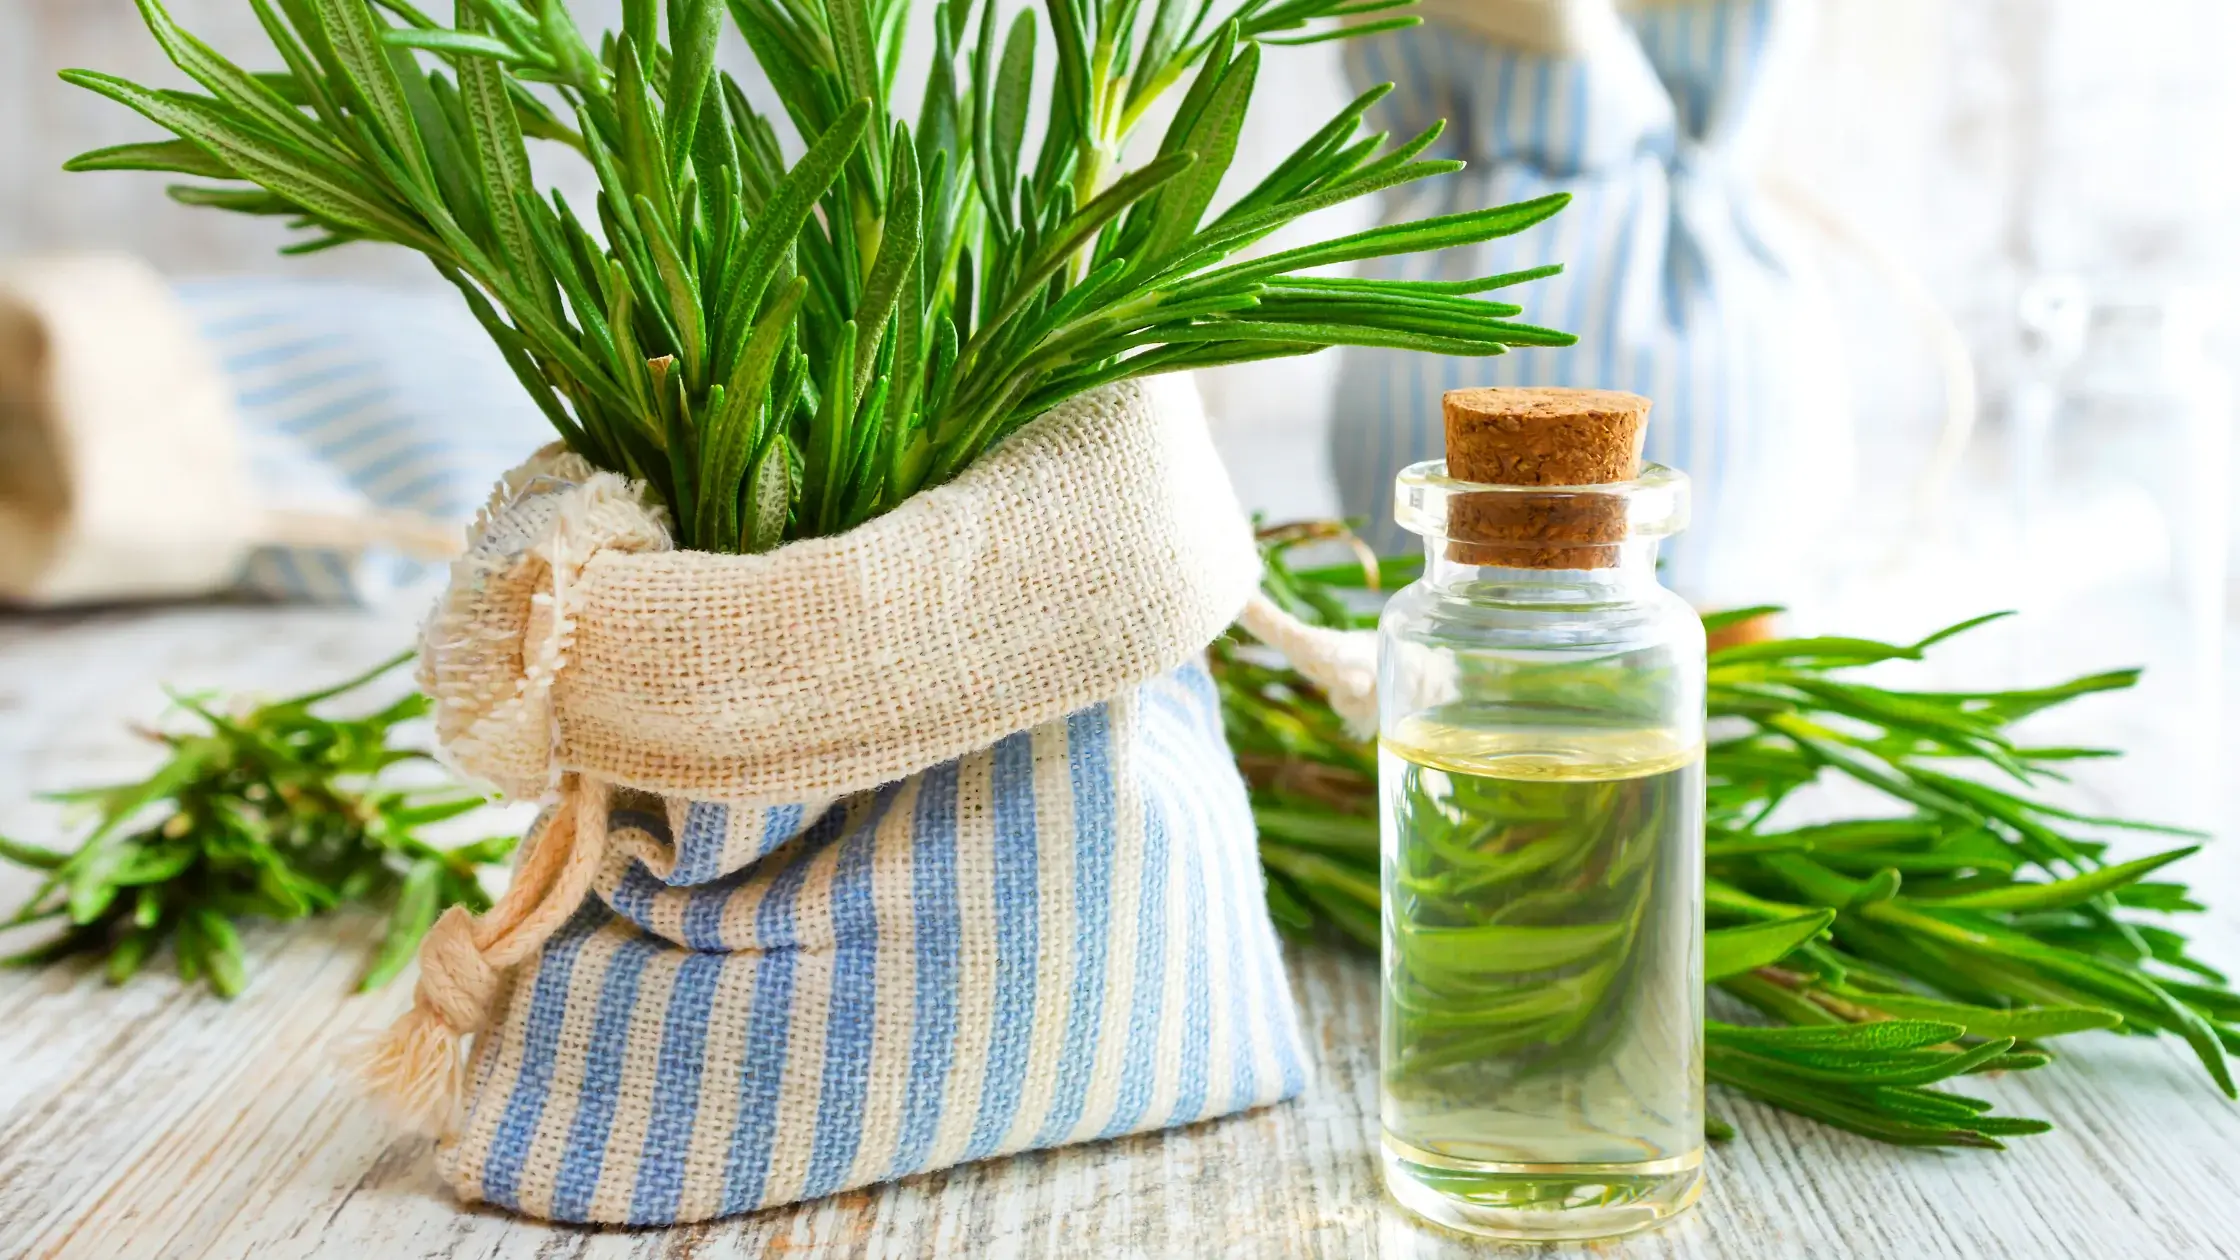 Rosemary Essential Oil For Sore Muscles In Bath